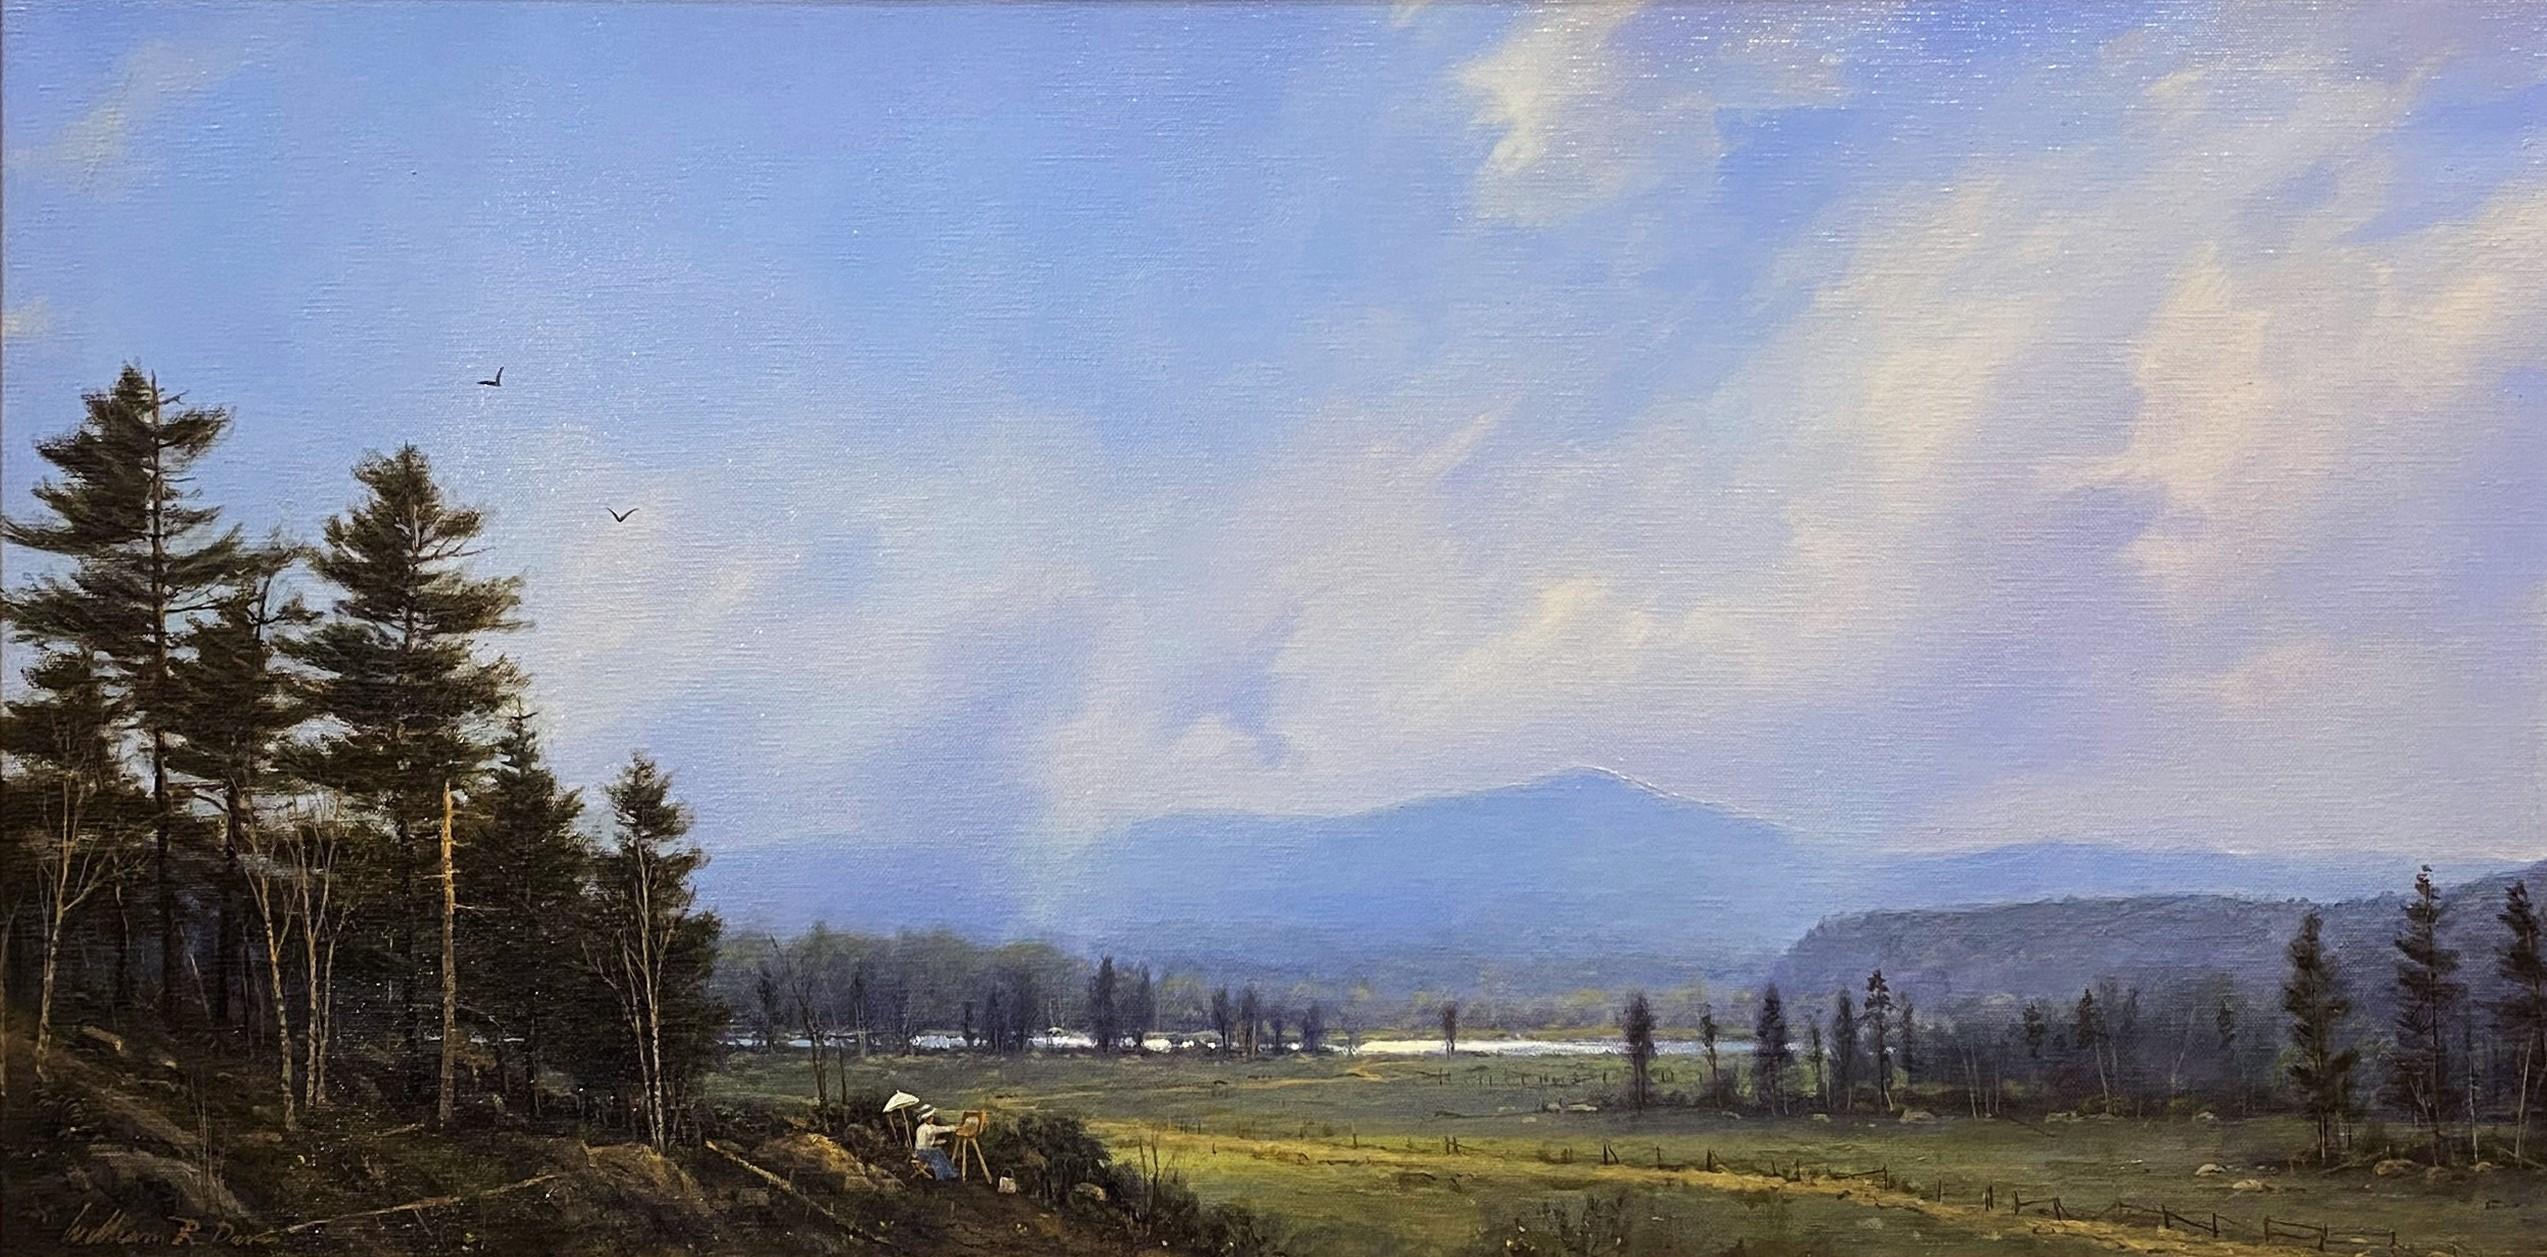 White Mountains, Artist at Work - Painting by William R. Davis